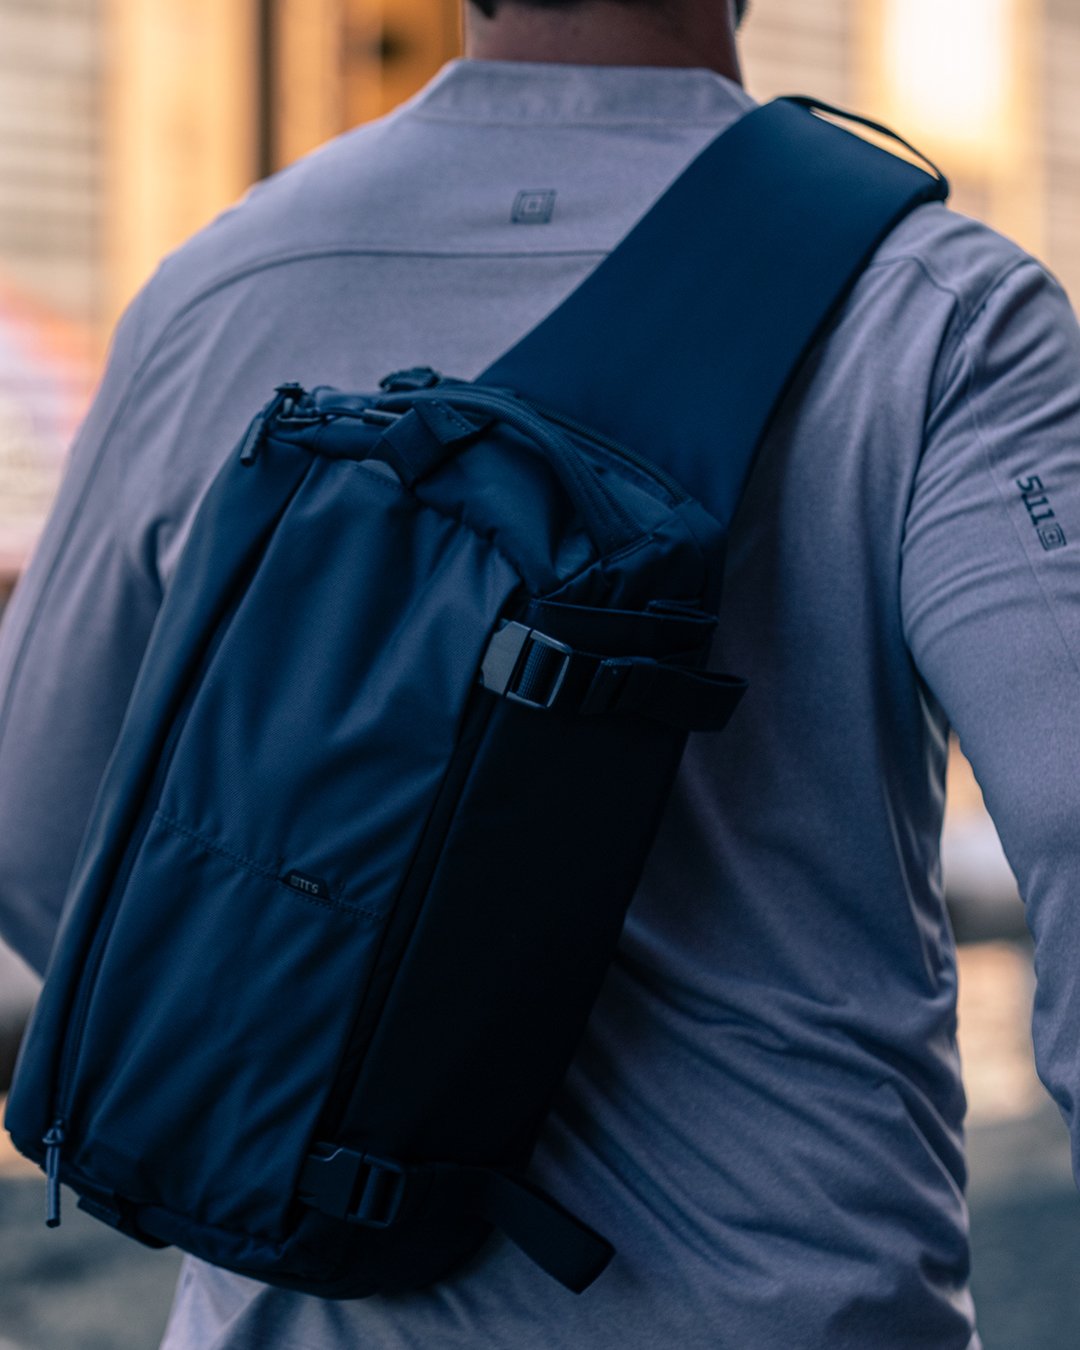 5.11 Tactical on X: Our LV10 sling pack is your new low-vis